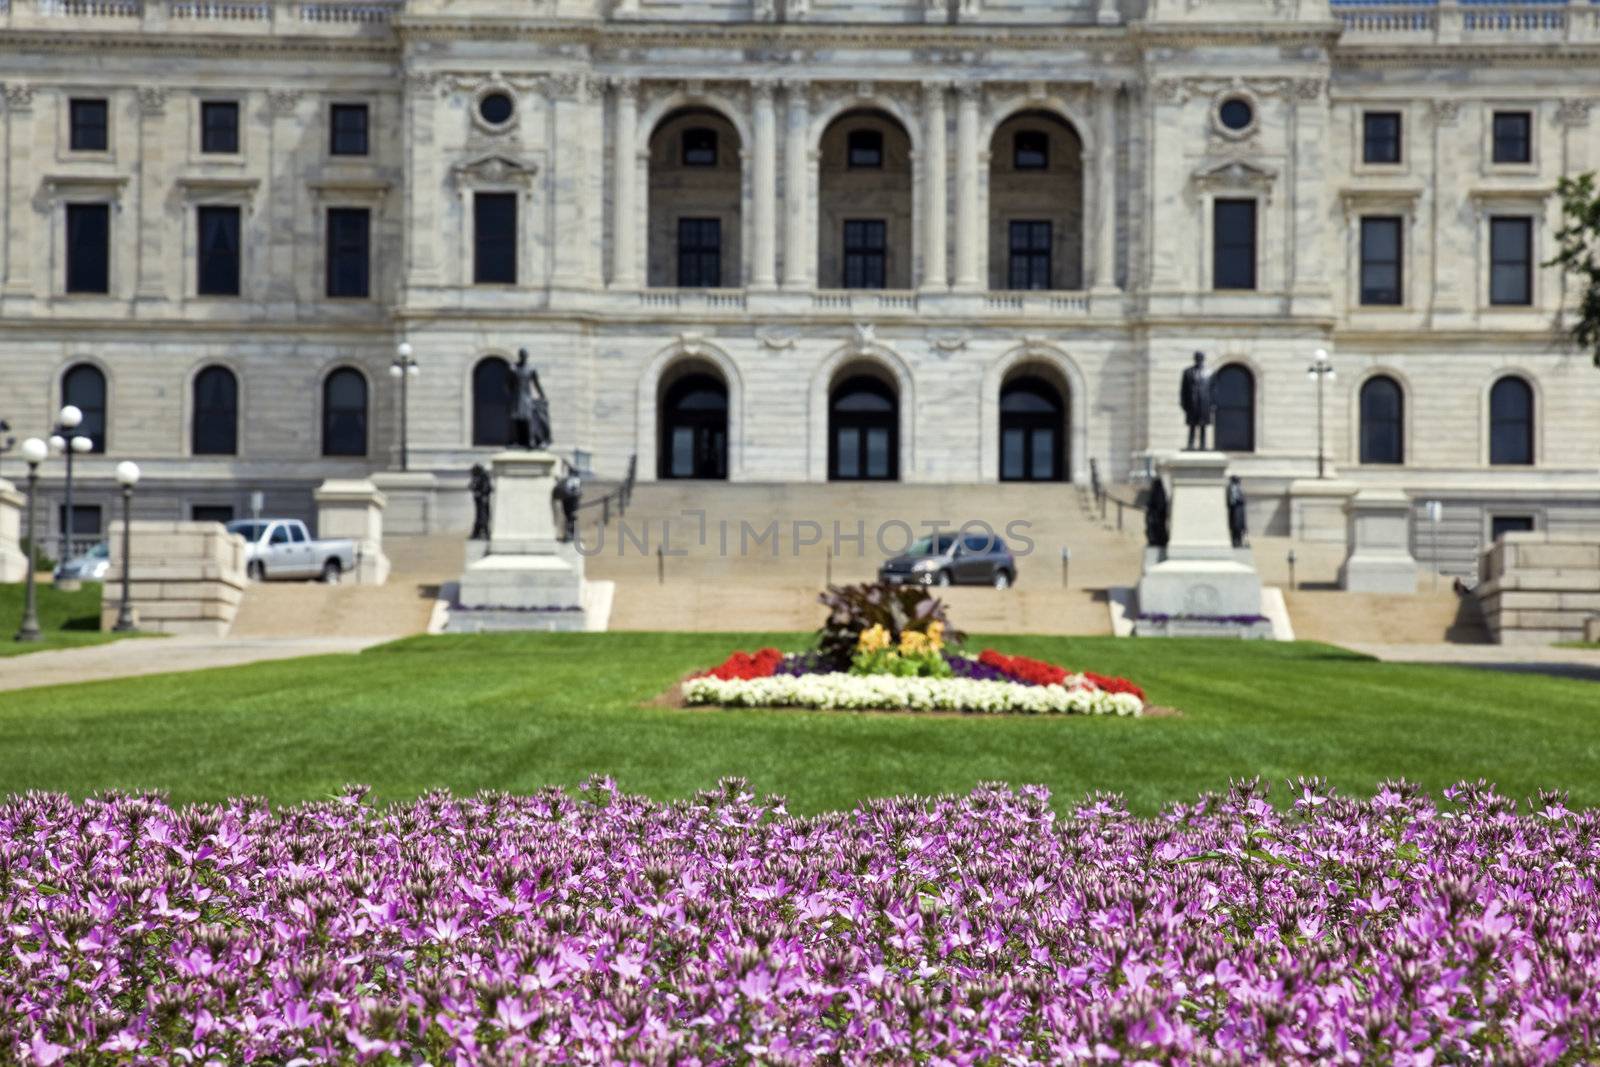 Flowers in front of State Capitol of Minnesota in St. Paul. Shallow DOF.